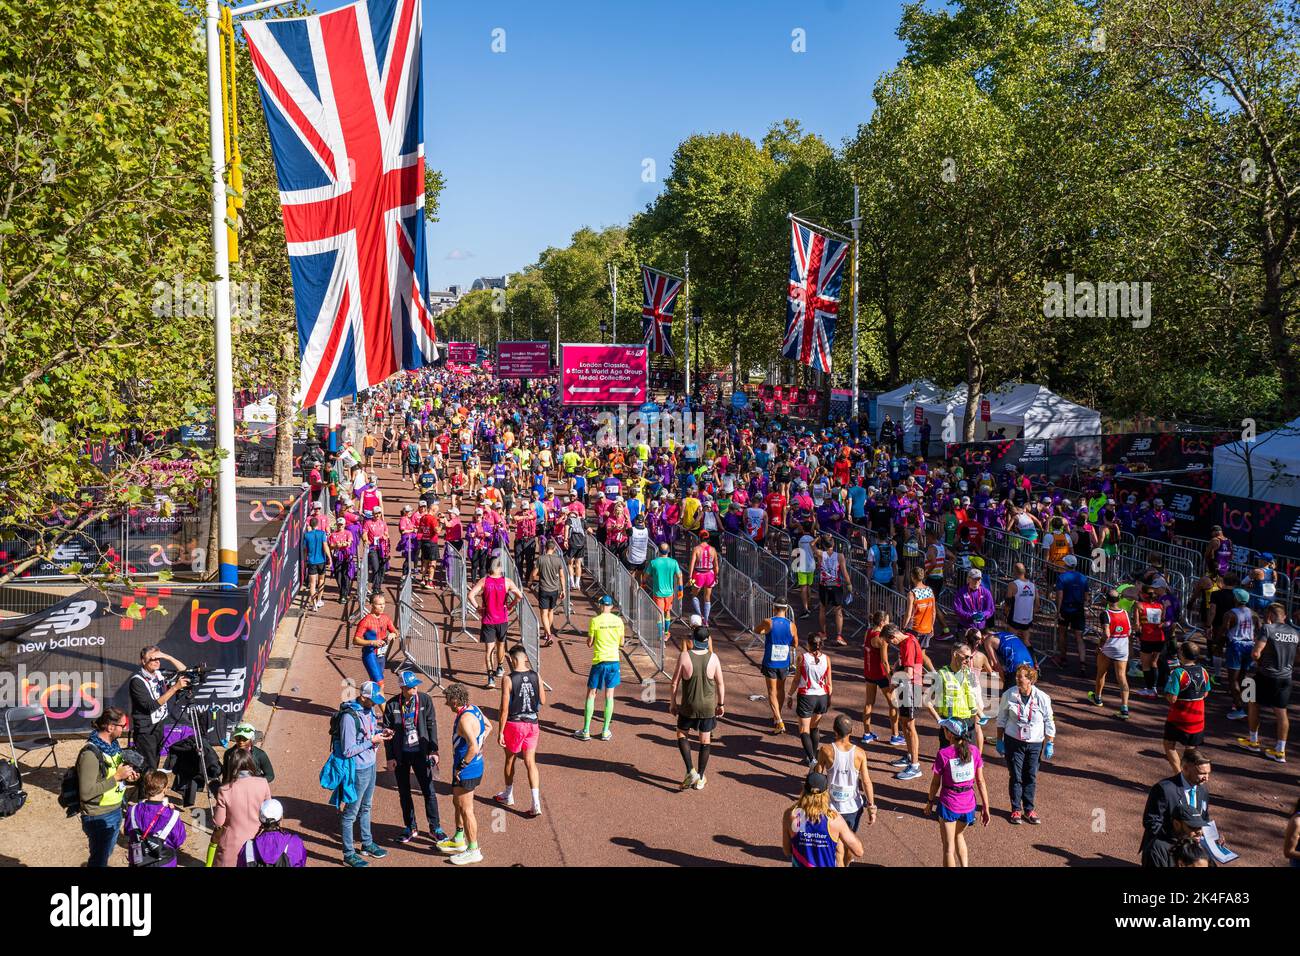 London UK. 2 October 2022 .  Marathon runners  crossing  the finishing line at The Mall. More than  40,000 athletes including  elite  runners, club runners and fun runners   take  part in the London Marathon sponsored by TCS Tata Consultancy Services over a 26.2 mile course.Credit: amer ghazzal/Alamy Live News. Stock Photo